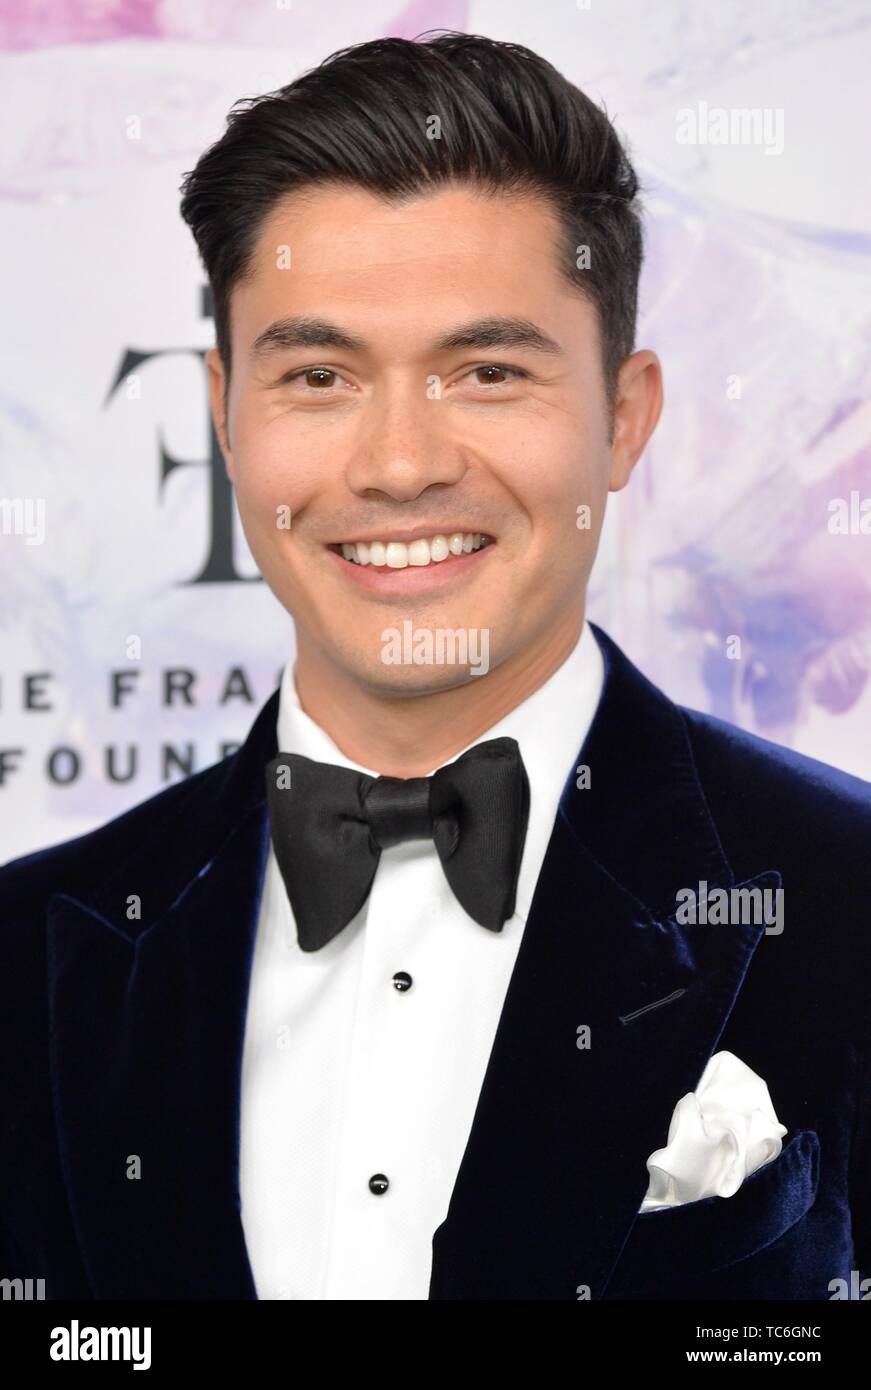 New York, NY, USA. 5th June, 2019. Harry Shum Jr at arrivals for The Fragrance Foundation Awards FiFi's, David H. Koch Theater at Lincoln Center, New York, NY June 5, 2019. Credit: Kristin Callahan/Everett Collection/Alamy Live News Stock Photo